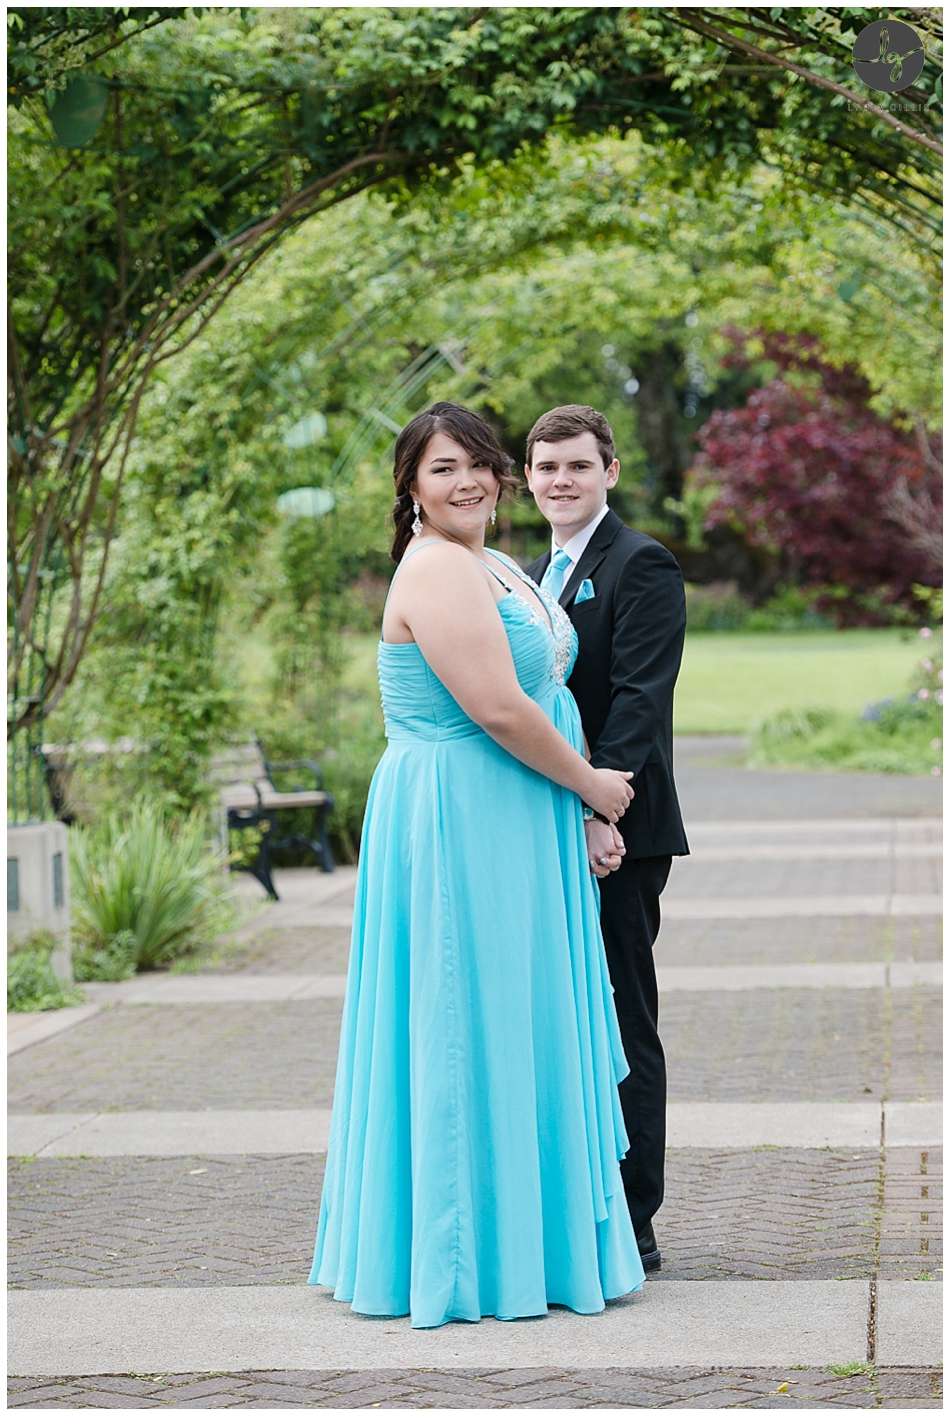 Beautiful outdoor prom pictures 